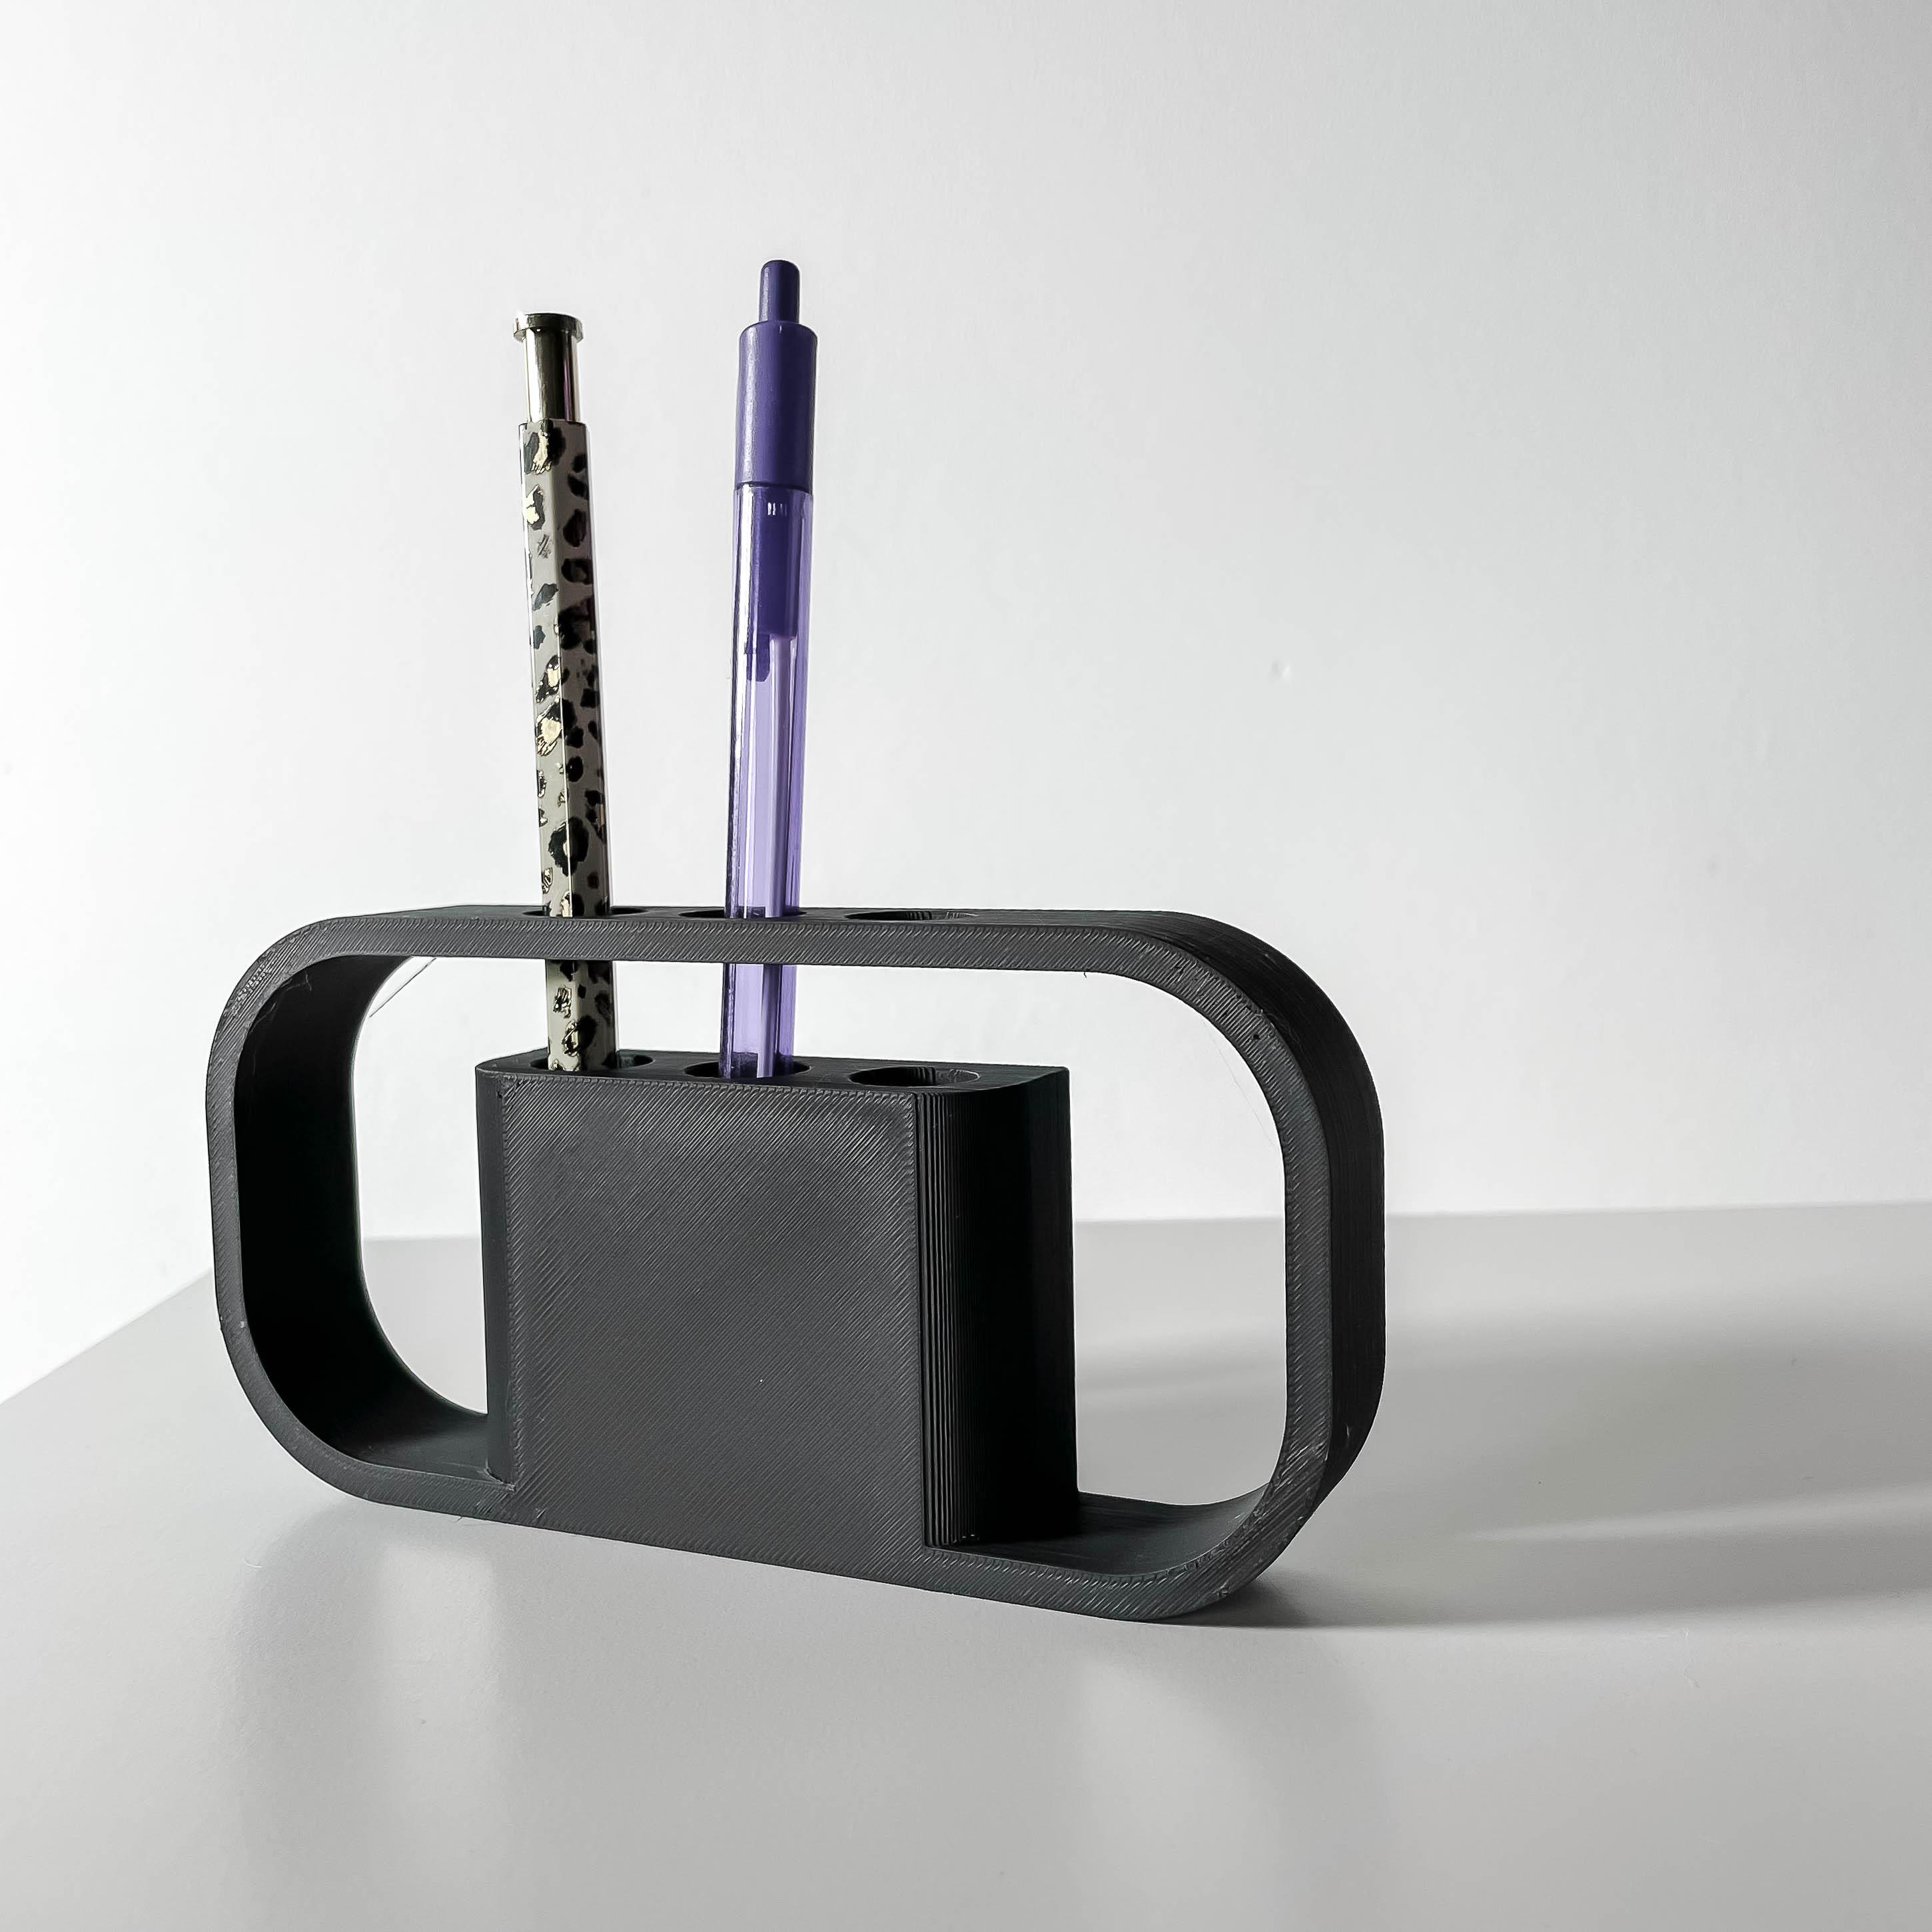 The Ilios Pen Holder | Desk Organizer and Pencil Cup Holder | Modern Office and Home Decor 3d model